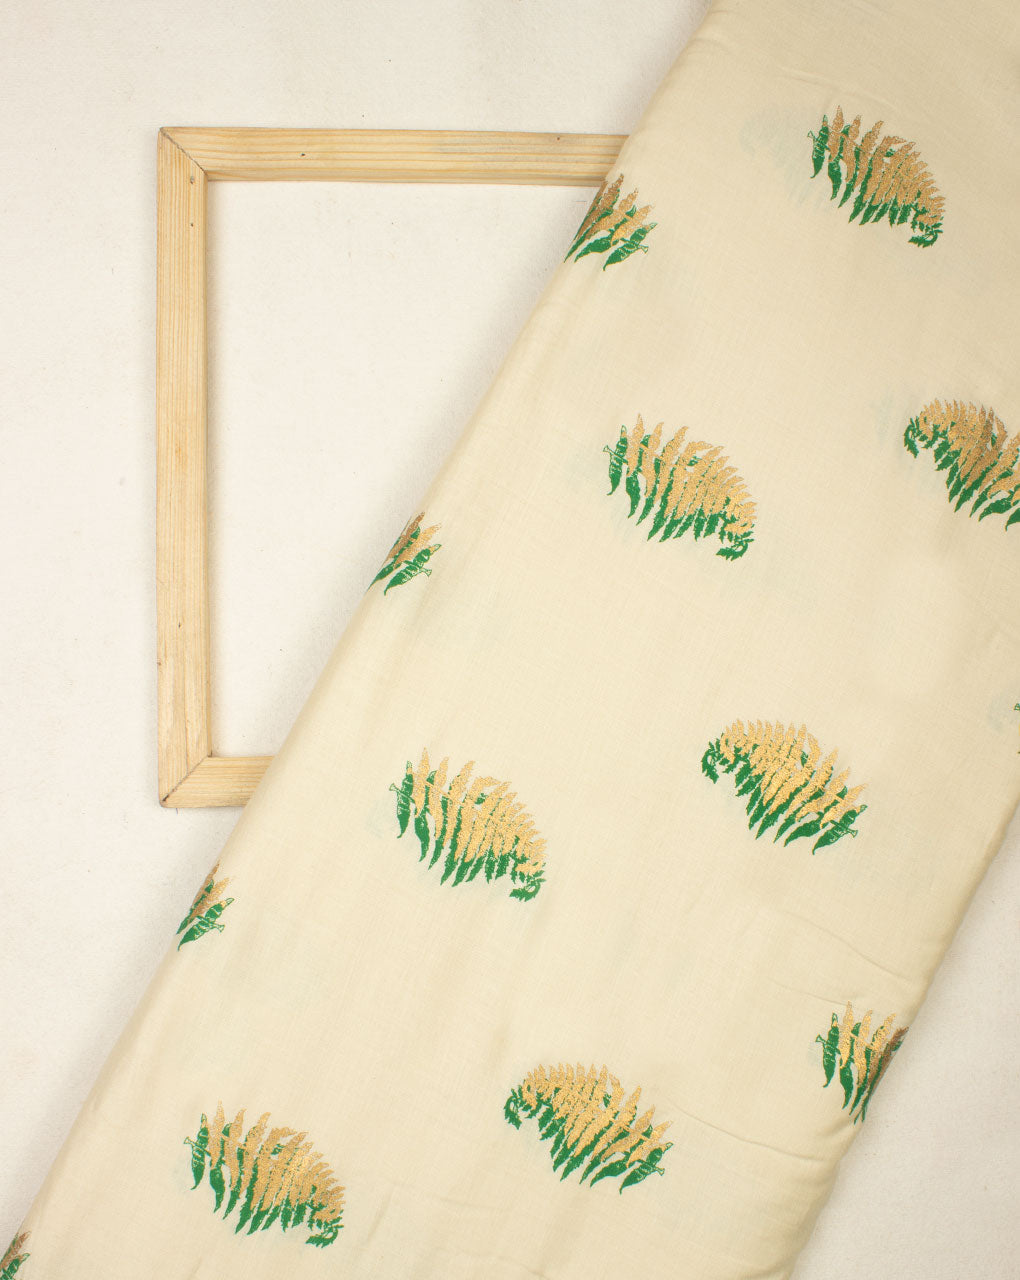 Off-White Green Floral Foil Screen Print Glazed Cotton Fabric - Fabriclore.com